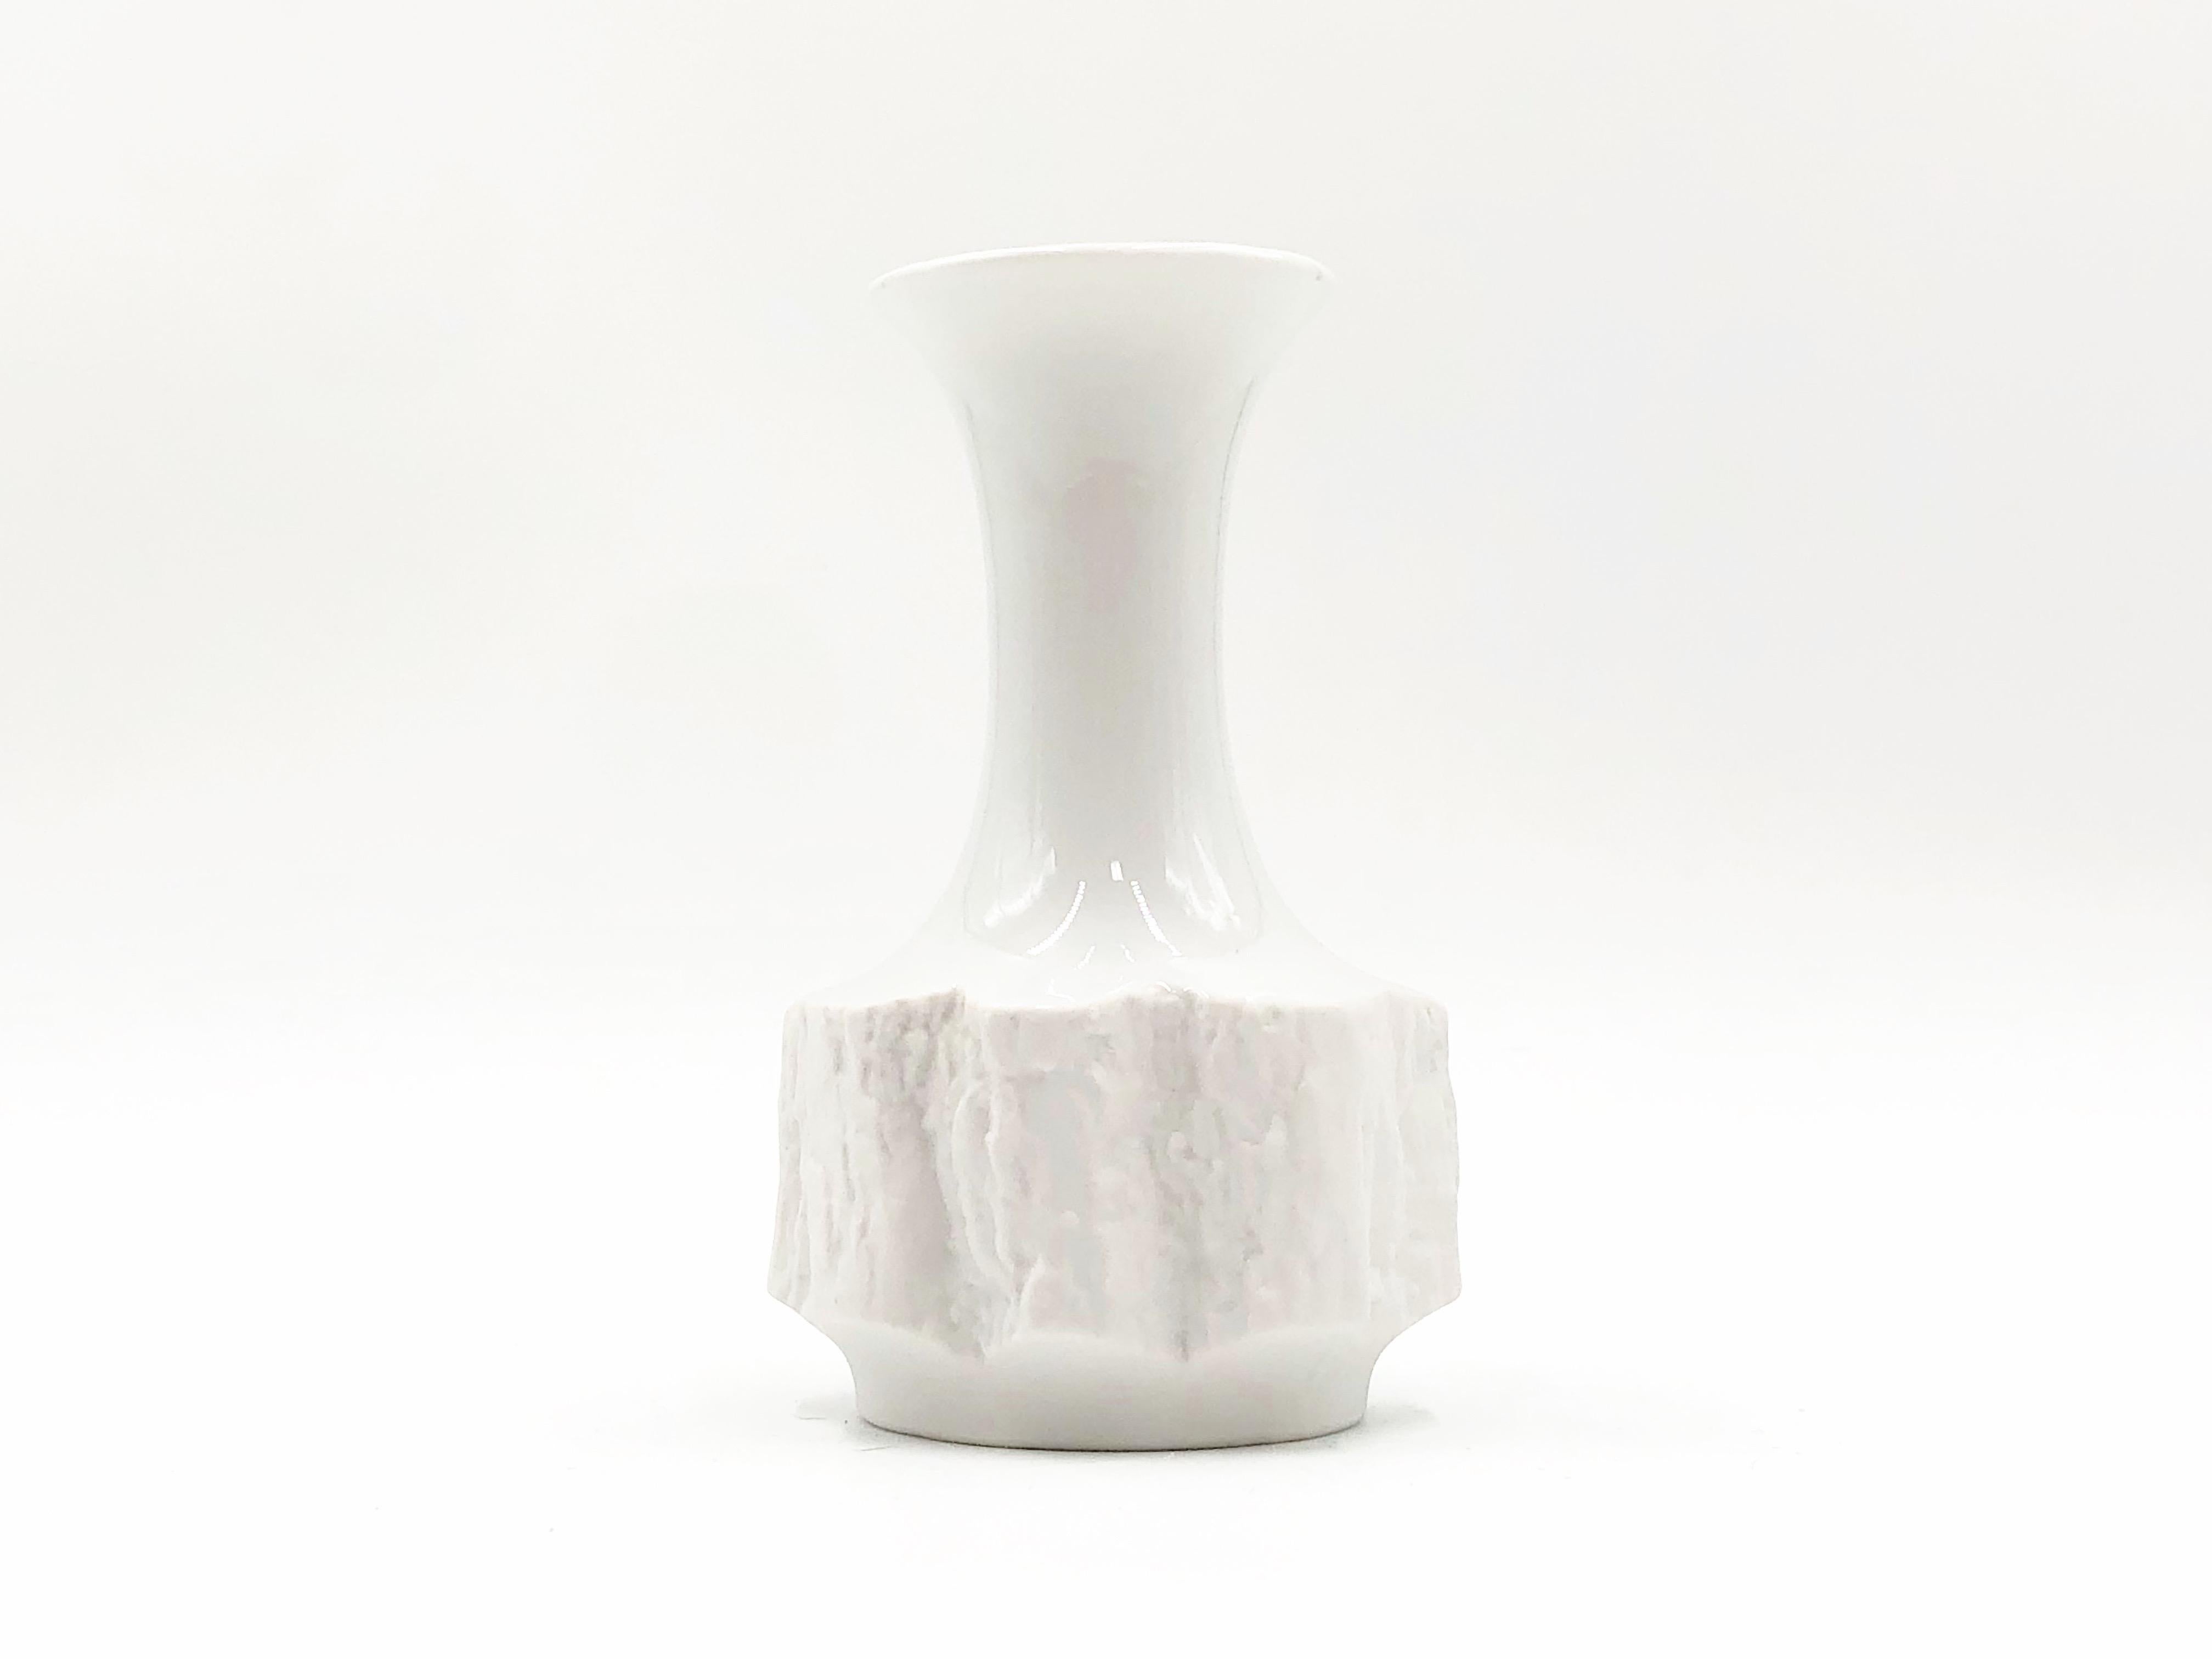 Late 20th Century Vintage White Bisque German Fine Bone Porcelain Vase by Bareuther, circa 1970s For Sale